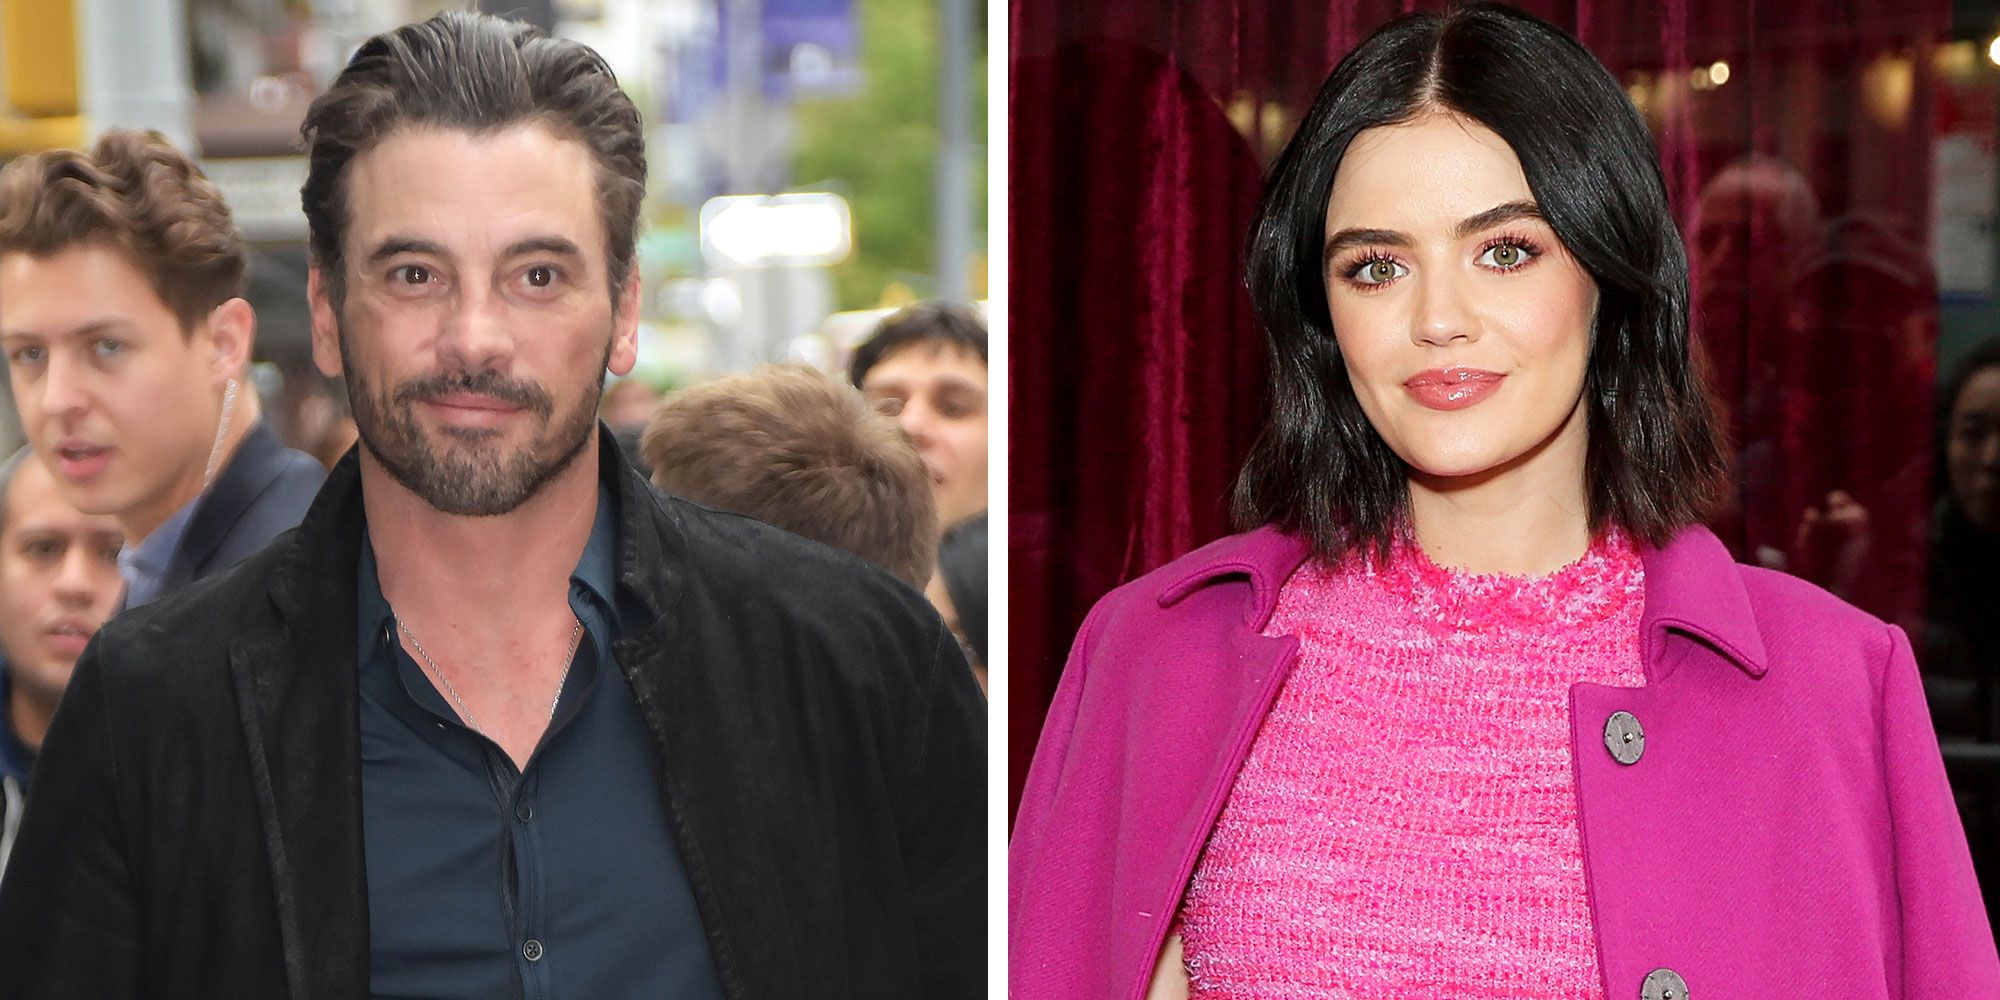 Skeet Ulrich Lucy Hale Gettyimages 1174484989 